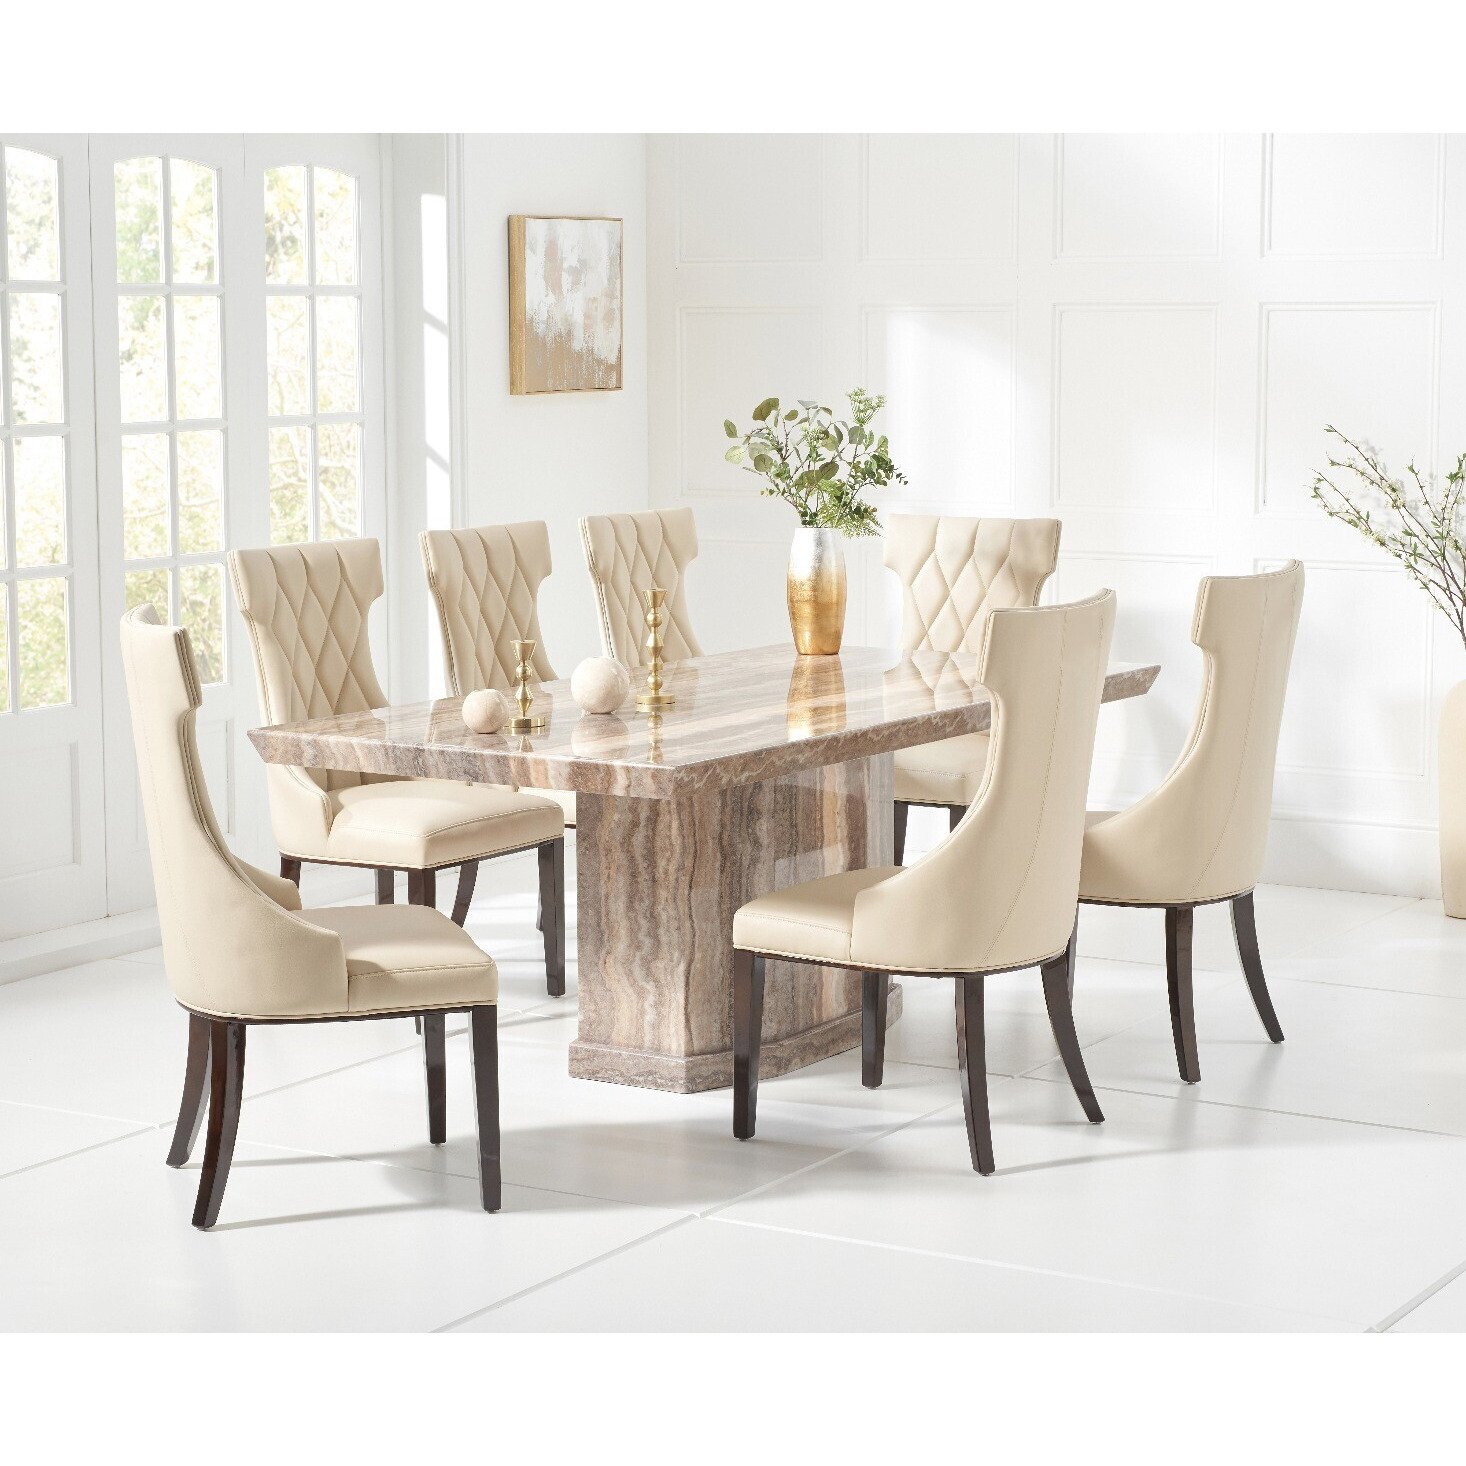 Carvelle 160cm Brown Pedestal Marble Dining Table With 4 Grey Sophia Chairs